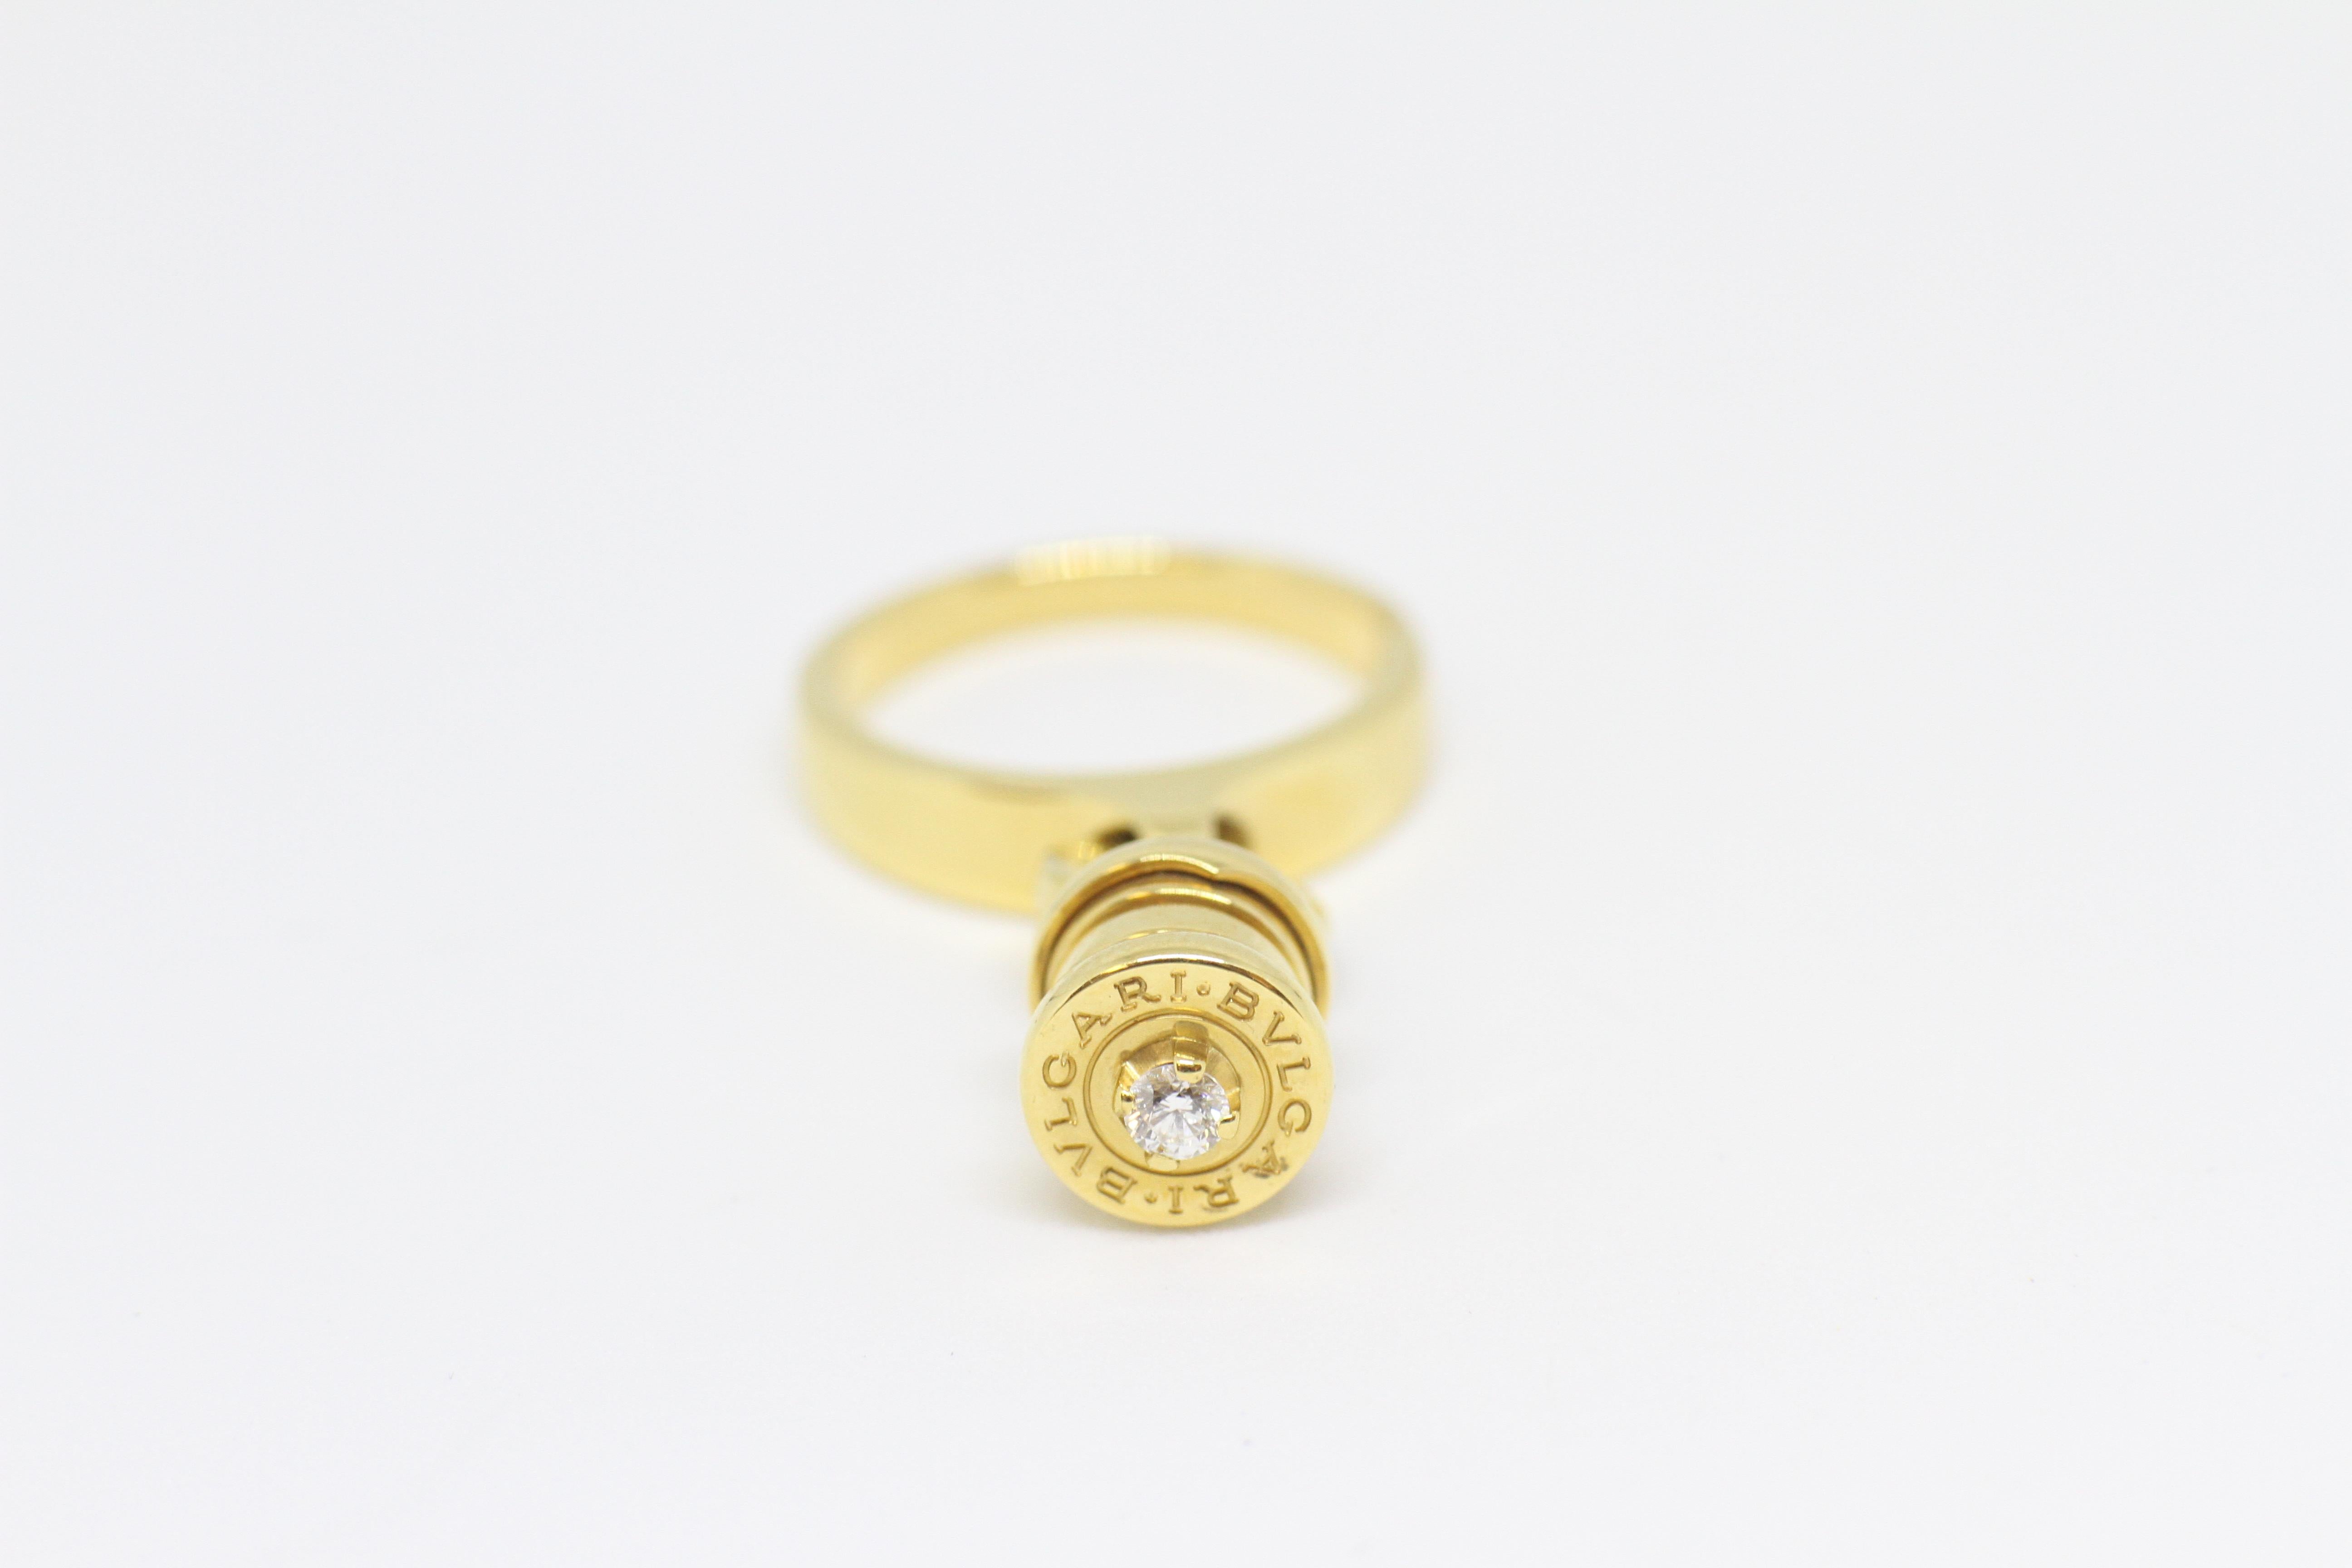 Bvlgari B-Zero 1 charm ring set with a brilliant cut diamond of approximately 0.04 carats in a four claw setting. Engraved Bvlgari on head of charm, link ring and band. Marked 18 carat yellow gold. Made in Italy. Uk finger size 'J'.
